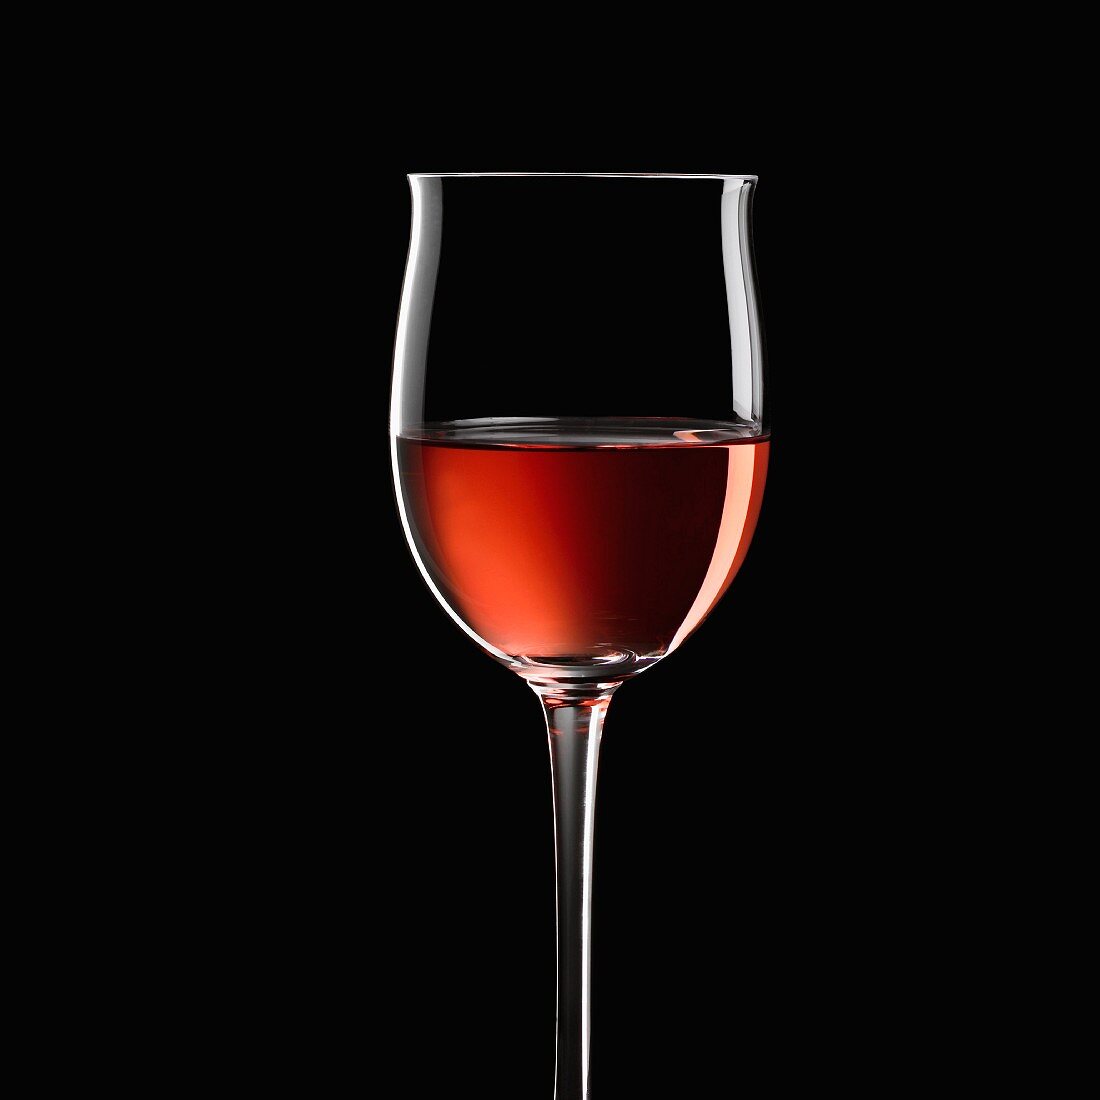 Glass of rosè wine, Italy, Europe